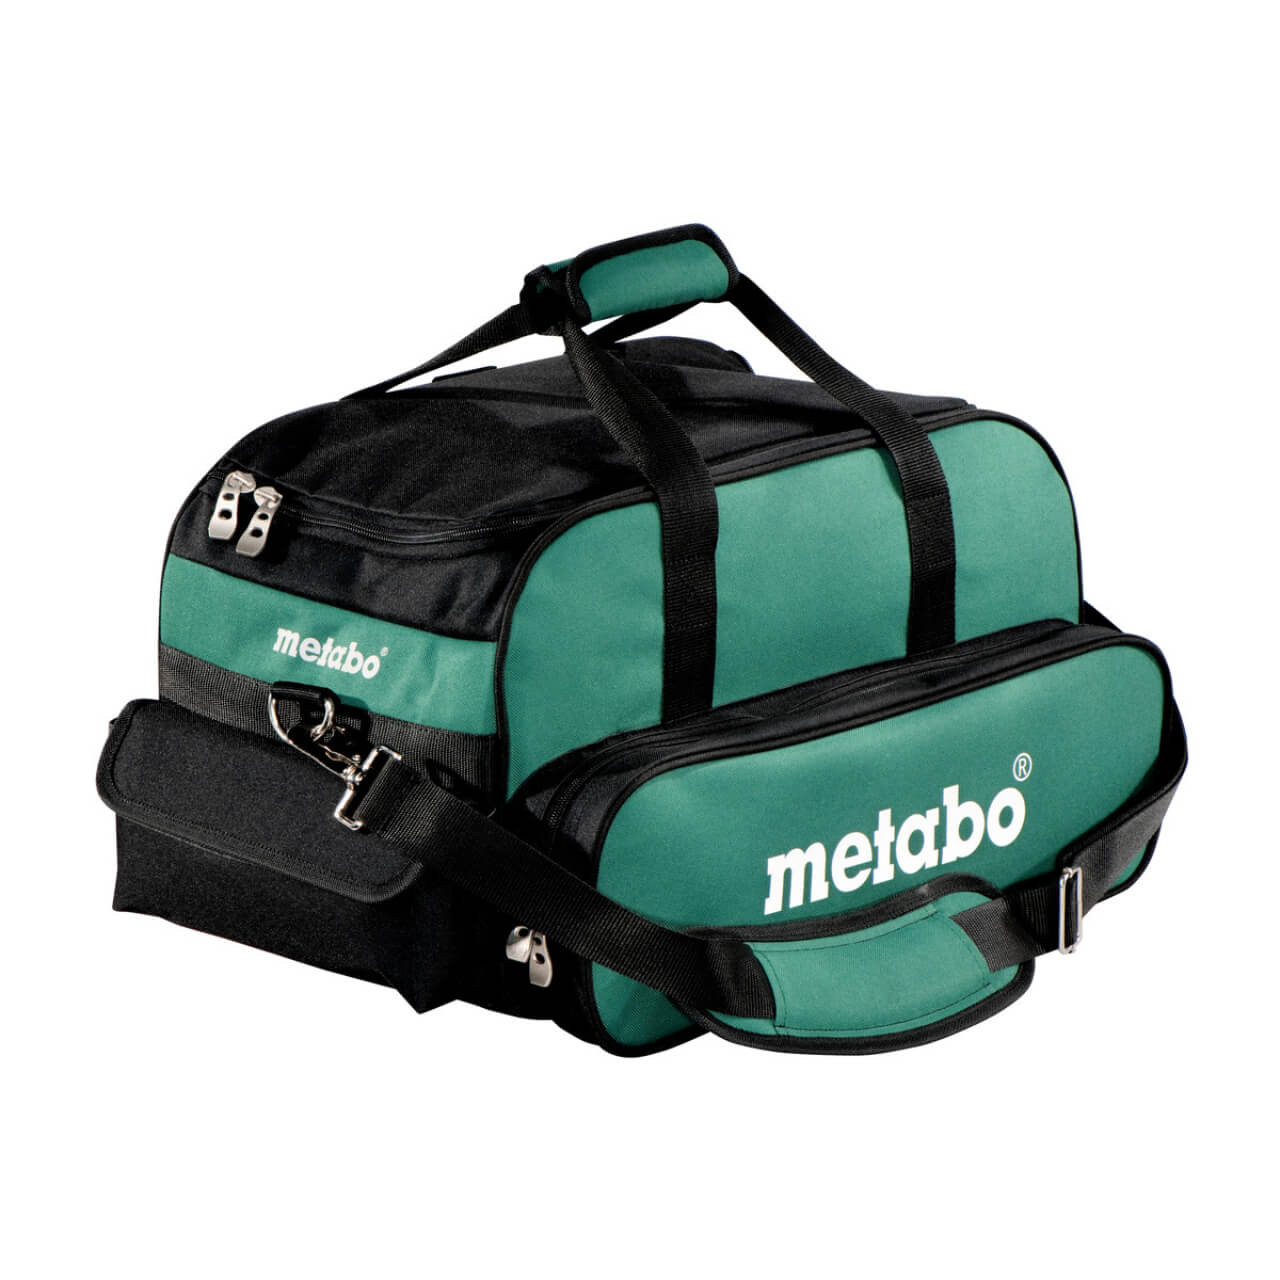 Metabo SMALL TOOL BAG Metabo Tool Bag  Small Water-Repellent And Tear-Proof Polyester Dimensions 460mm x 260mm x 280mm